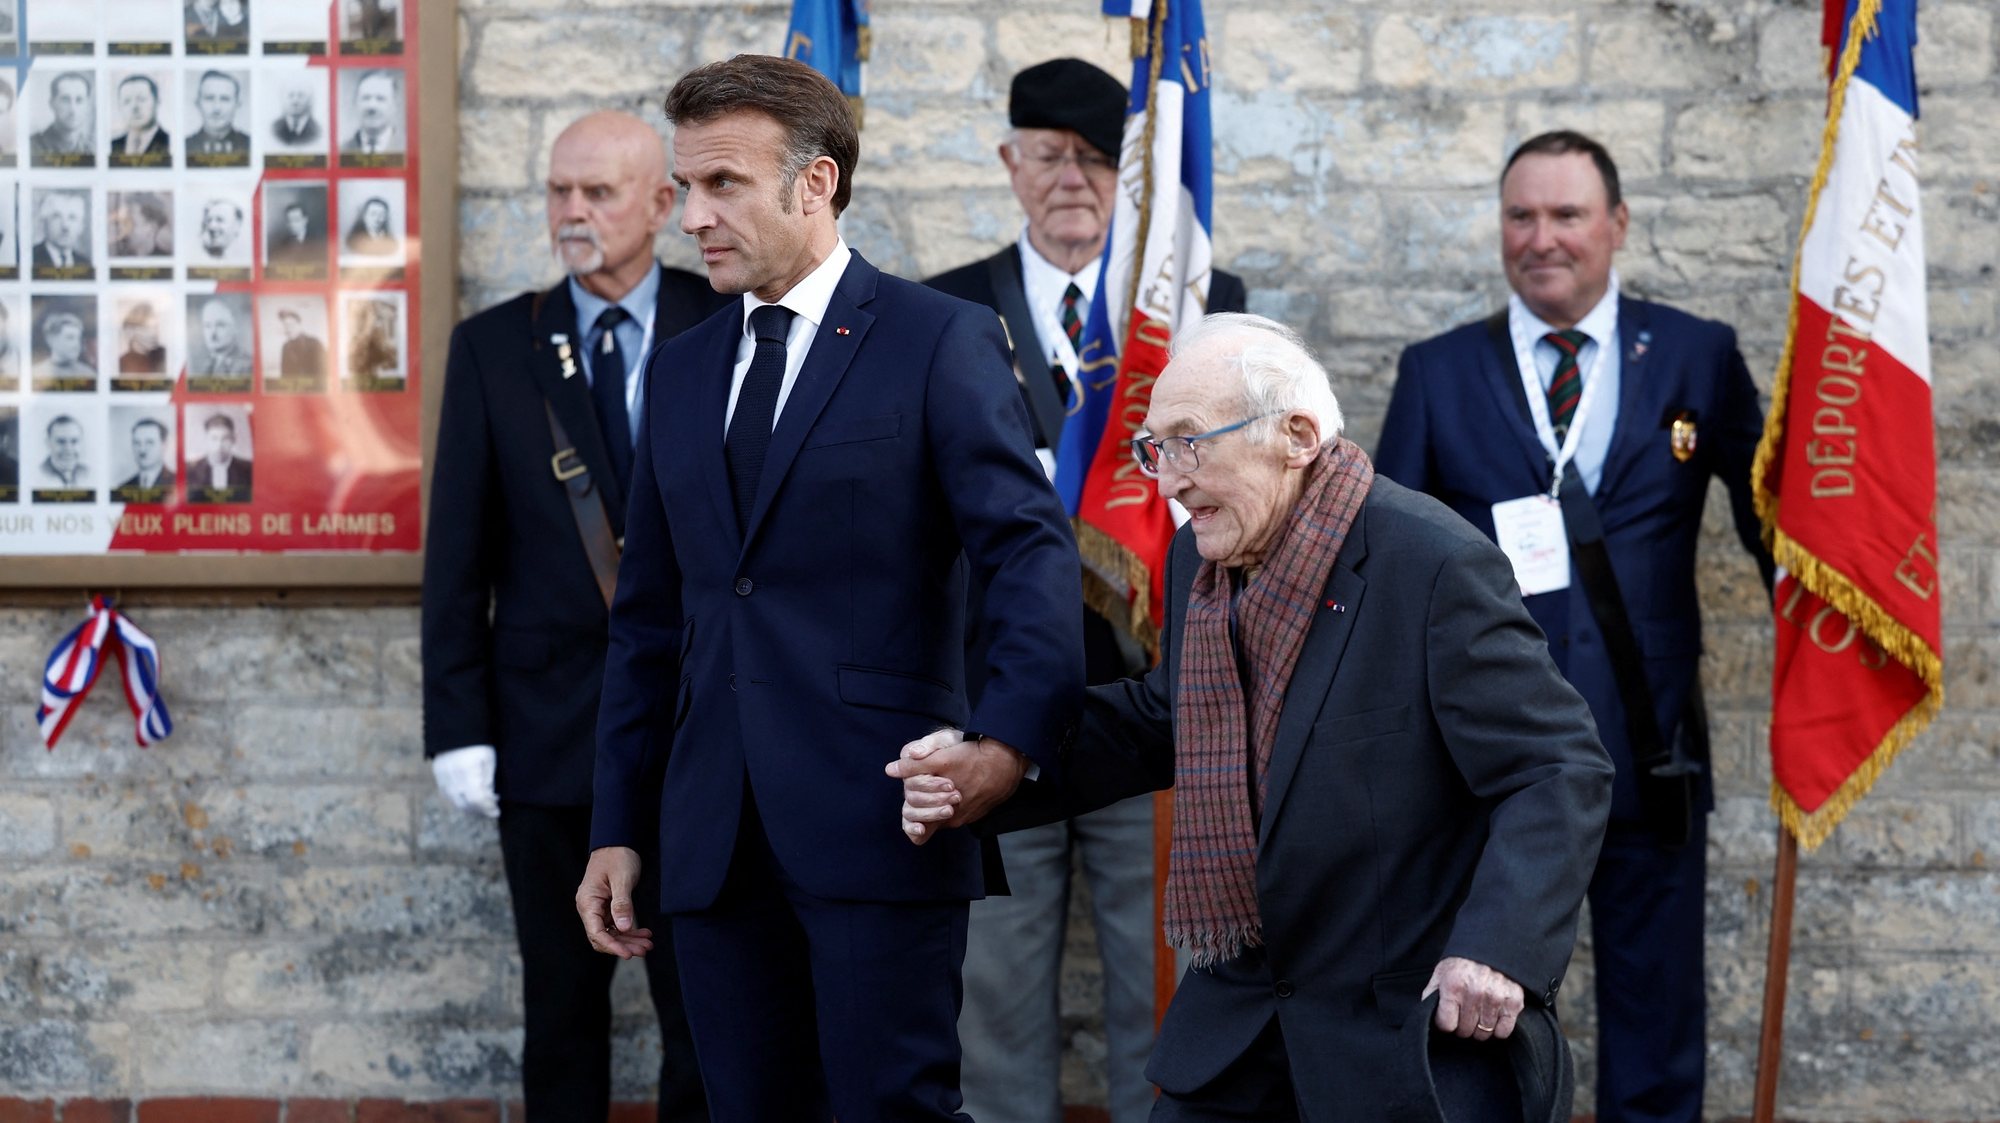 epa11391884 French President Emmanuel Macron holds the hand of Bernard Duval, a survivor of the 1944 Caen prison massacre, during a ceremony at the Caen prison to pay tribute to French Resistance fighters in Caen, north-western France, 05 June 2024. French President Macron launched the commemoration of the 80th anniversary of D-Day, the Normandy landings of Western Allied forces on 06 June 1944 that initiated the liberation of western Europe during World War II, by paying tribute to the French Resistance fighters.  EPA/BENOIT TESSIER / POOL  MAXPPP OUT